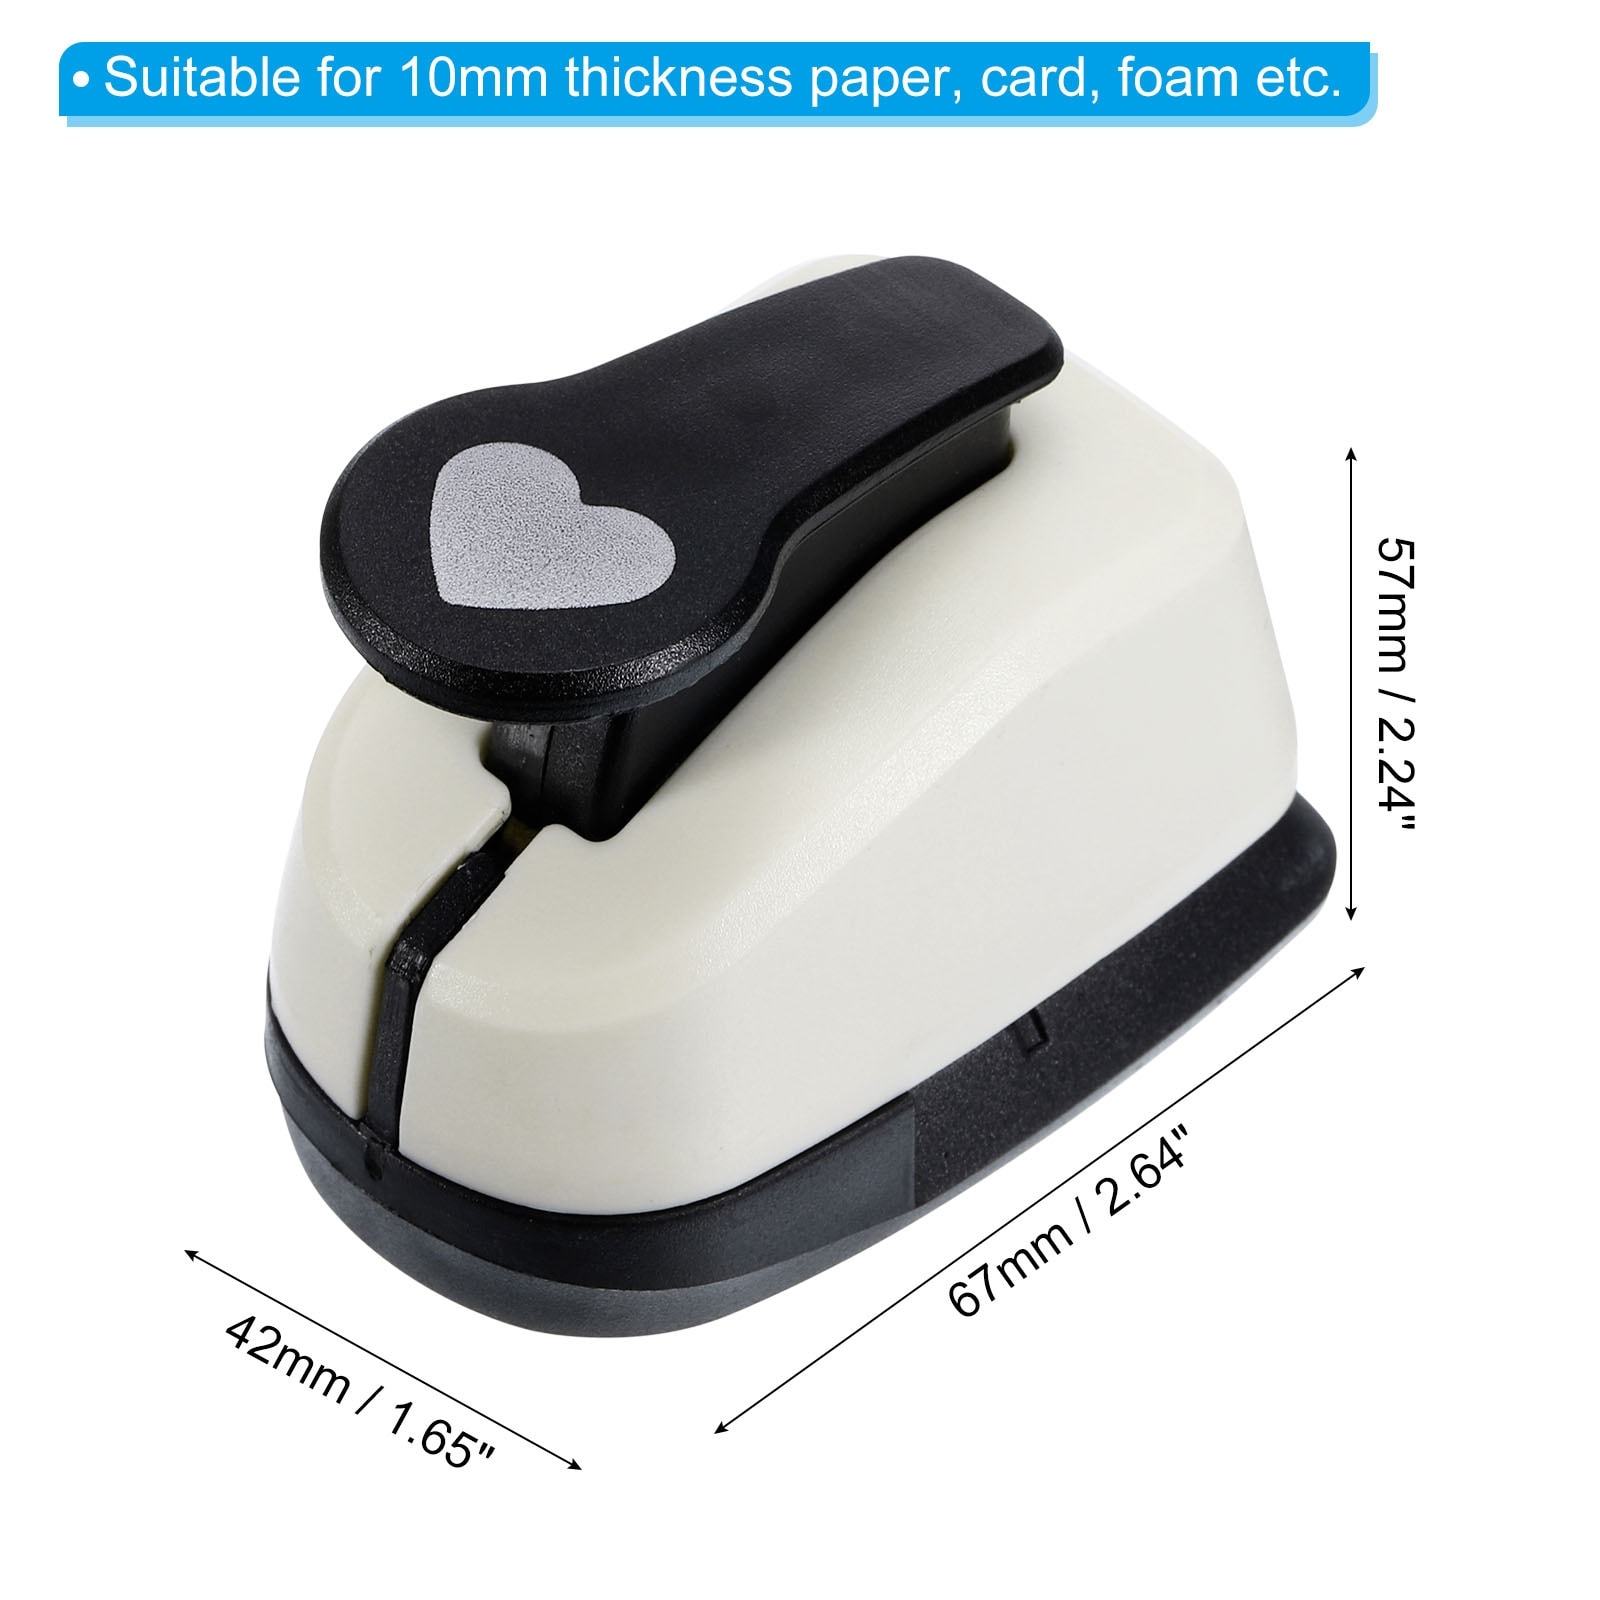 0.6Inch Heart Punch, Heart Hole Paper Punch Hole Puncher Shape Punches -  White, Black - On Sale - Bed Bath & Beyond - 38236280